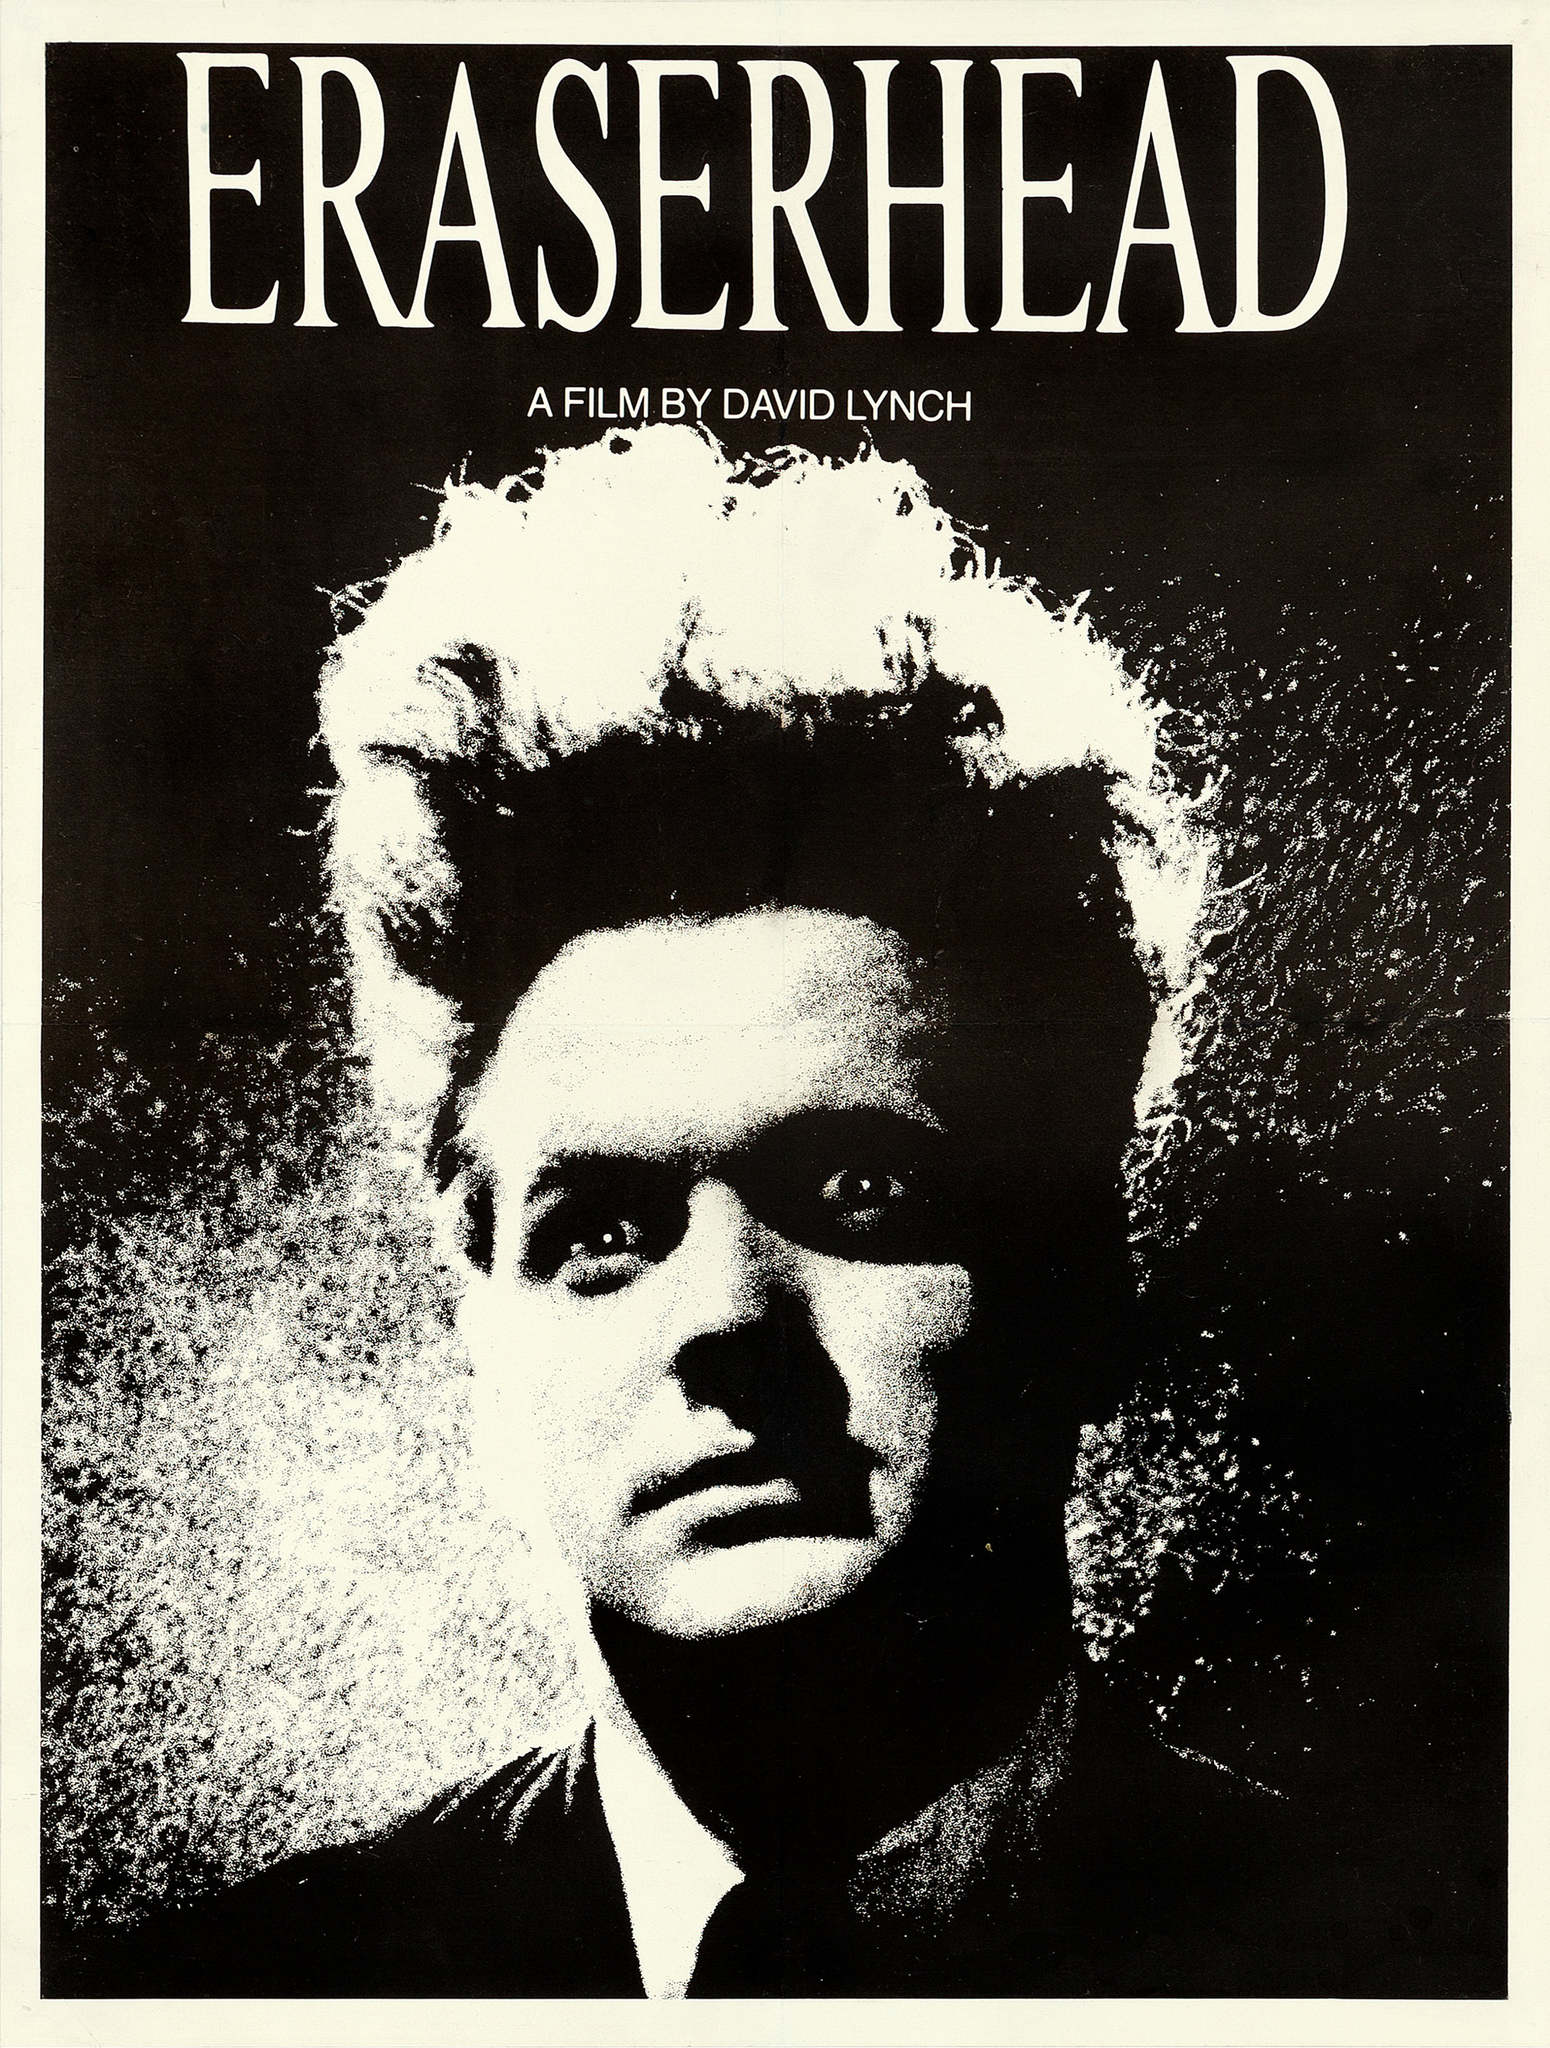 ERASERHEAD LIMITED EDITION SILK SCREENED POSTER